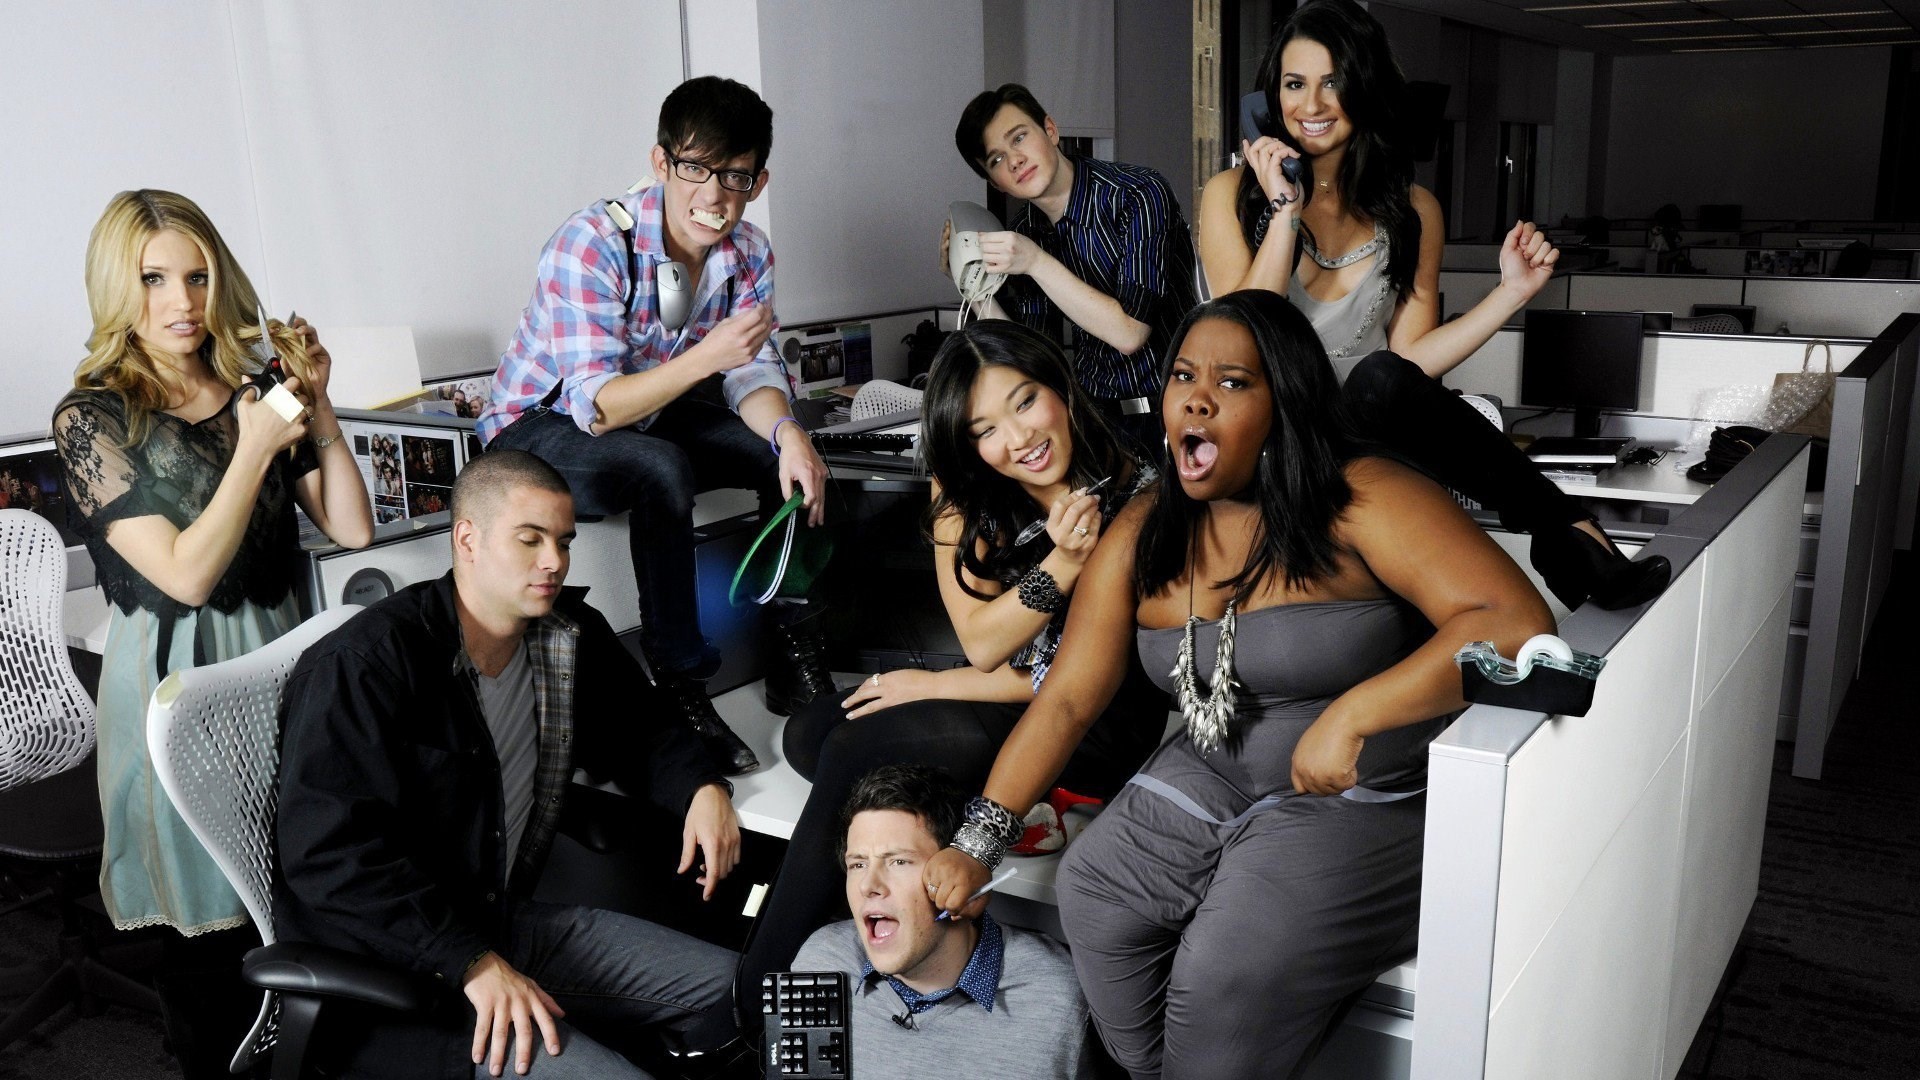 1920x1080 free wallpaper and screensavers for glee